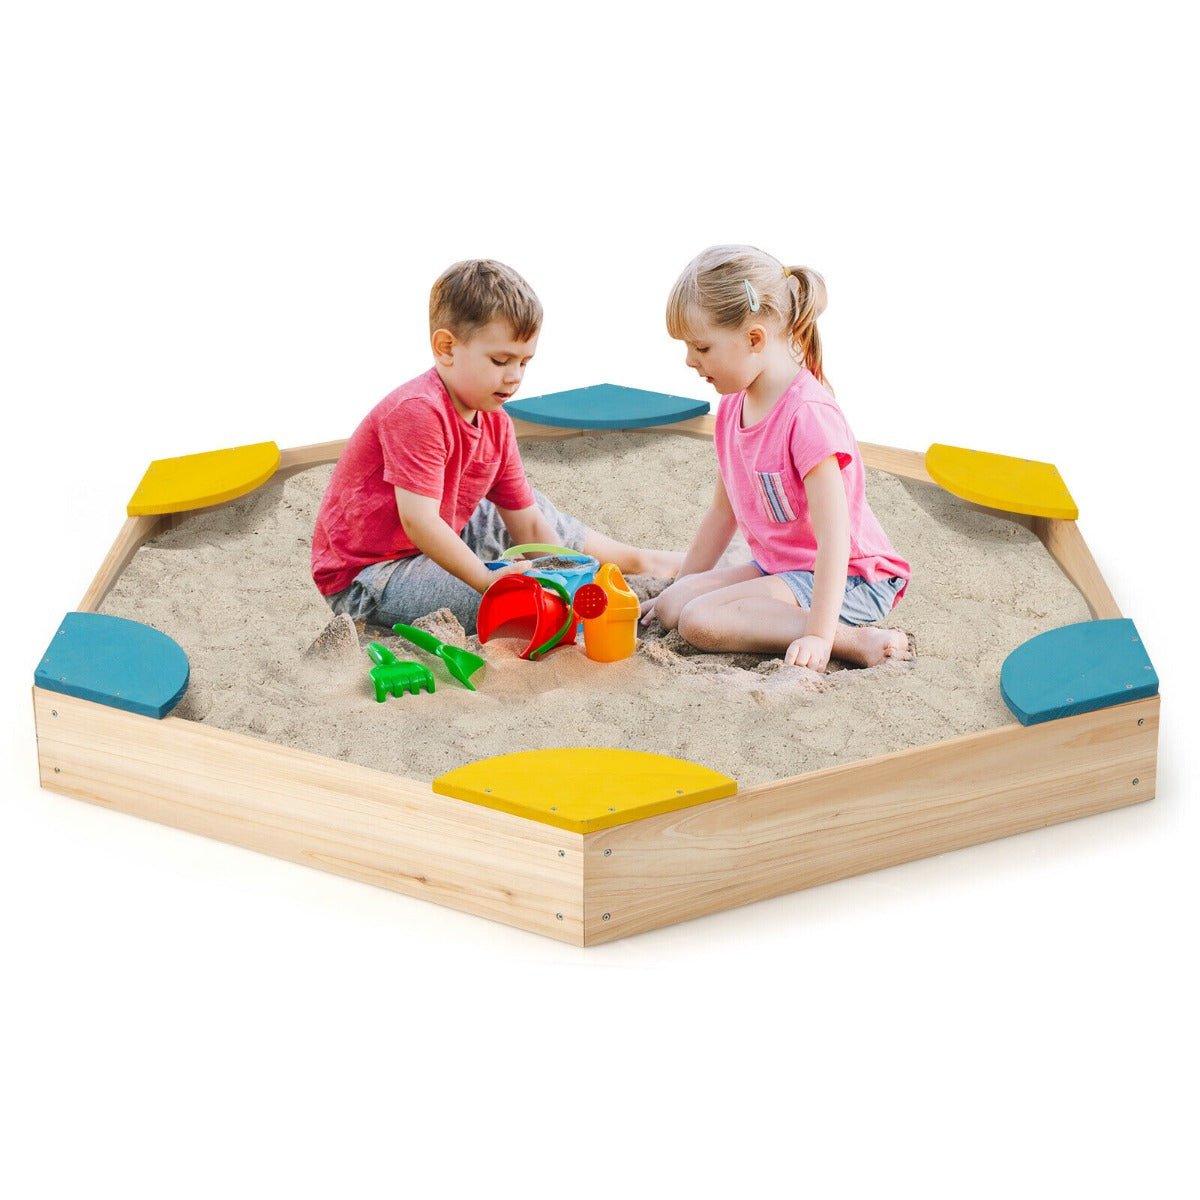 Upgrade Your Backyard with a Wood Sand Box for Kids